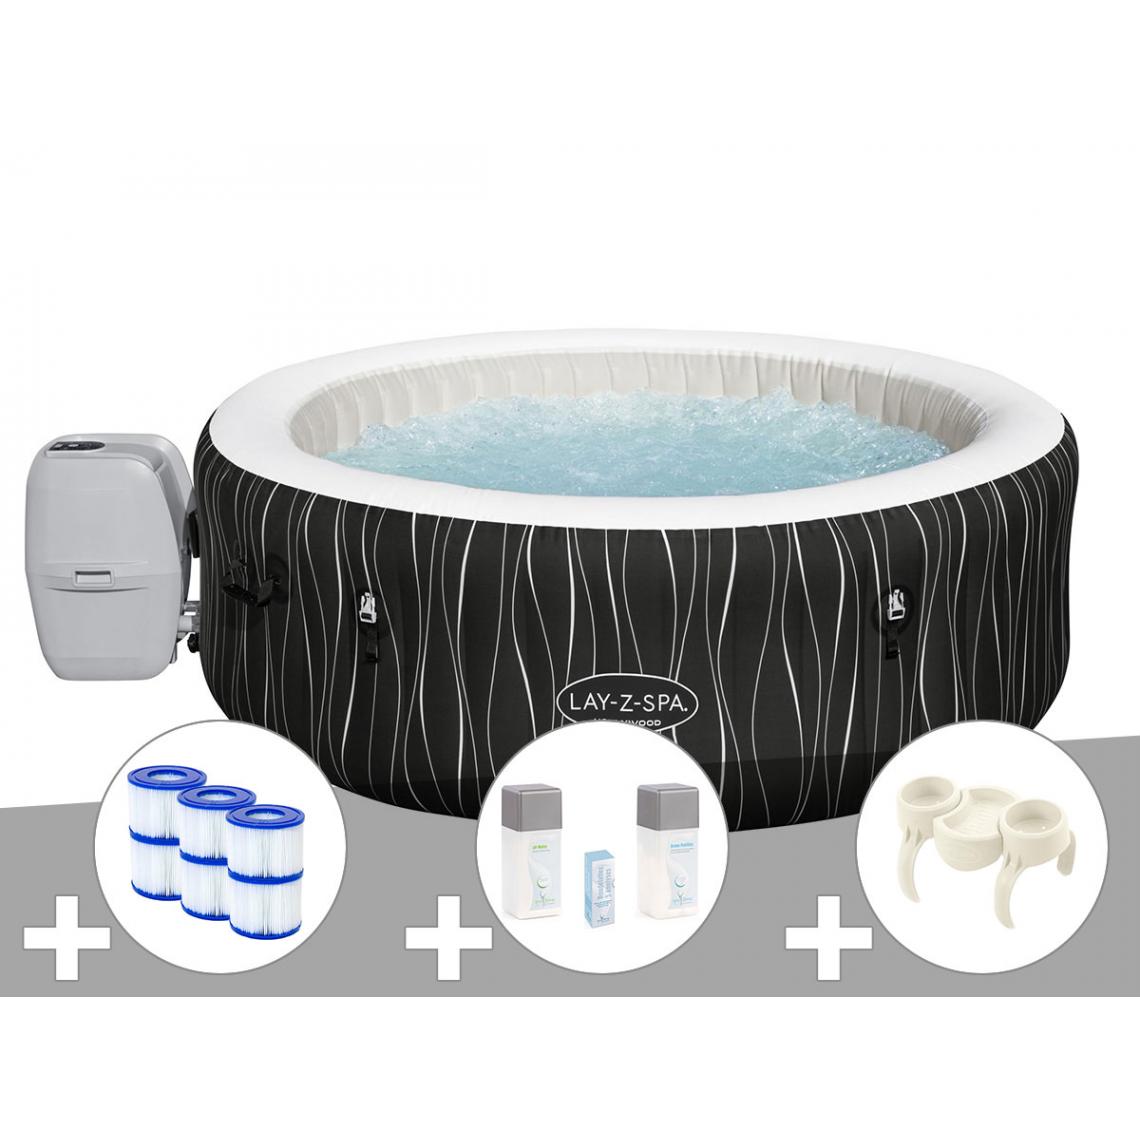 Bestway - Kit spa gonflable Bestway Lay-Z-Spa Hollywood rond Airjet 4/6 places + 6 filtres + Kit traitement brome + Porte-gobelets - Spa gonflable